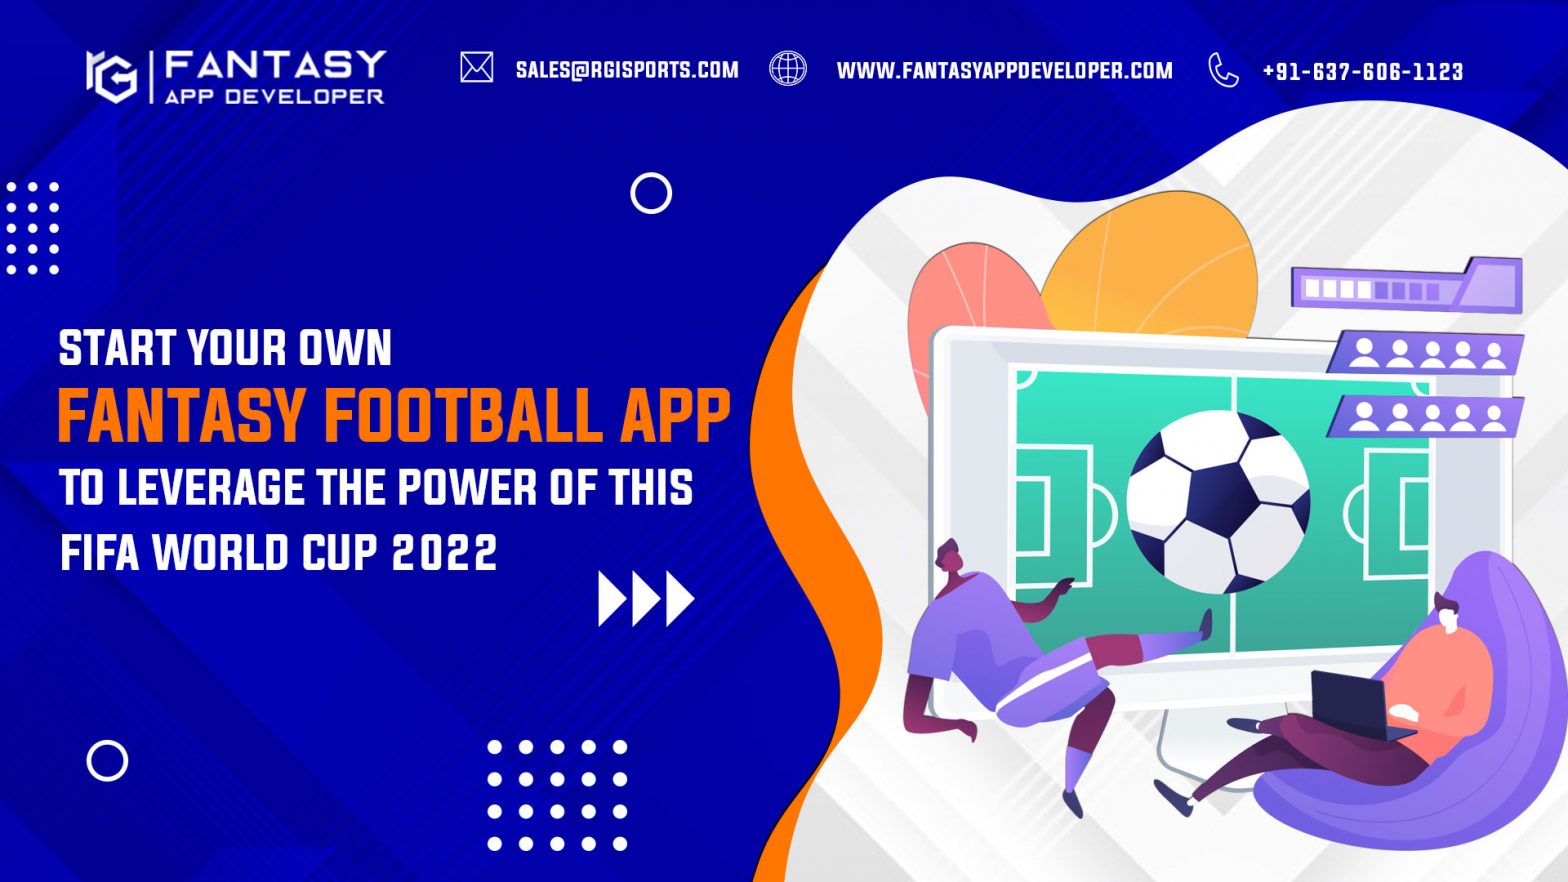 Leverage the power of this FIFA World Cup 2022: Fantasy Football App